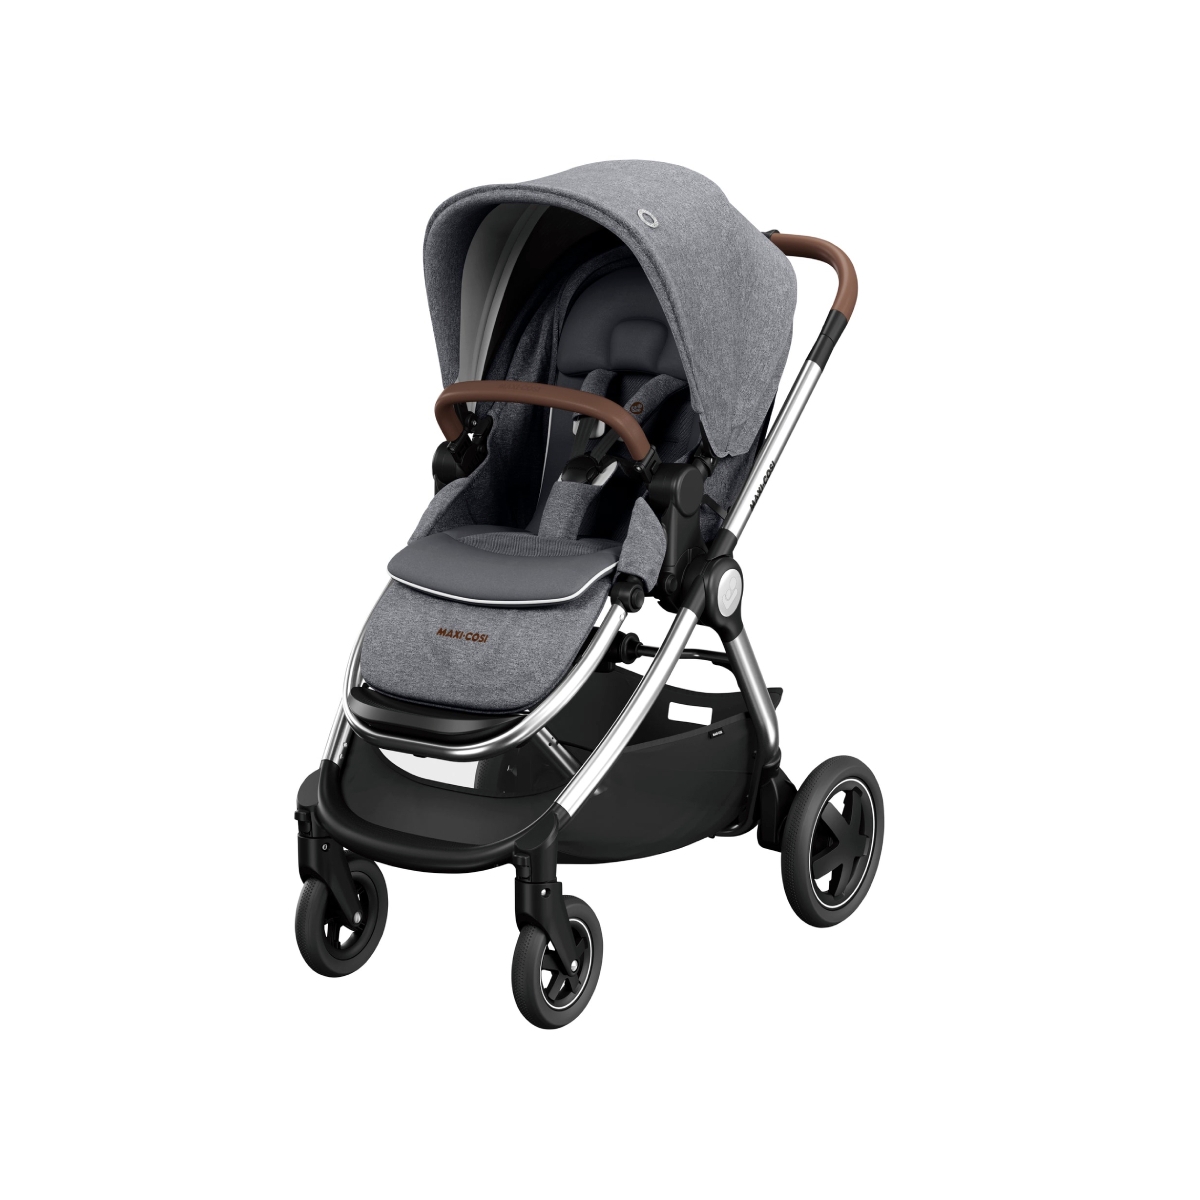 Maxi Cosi Adorra Luxe Stroller with Chrome Chassis